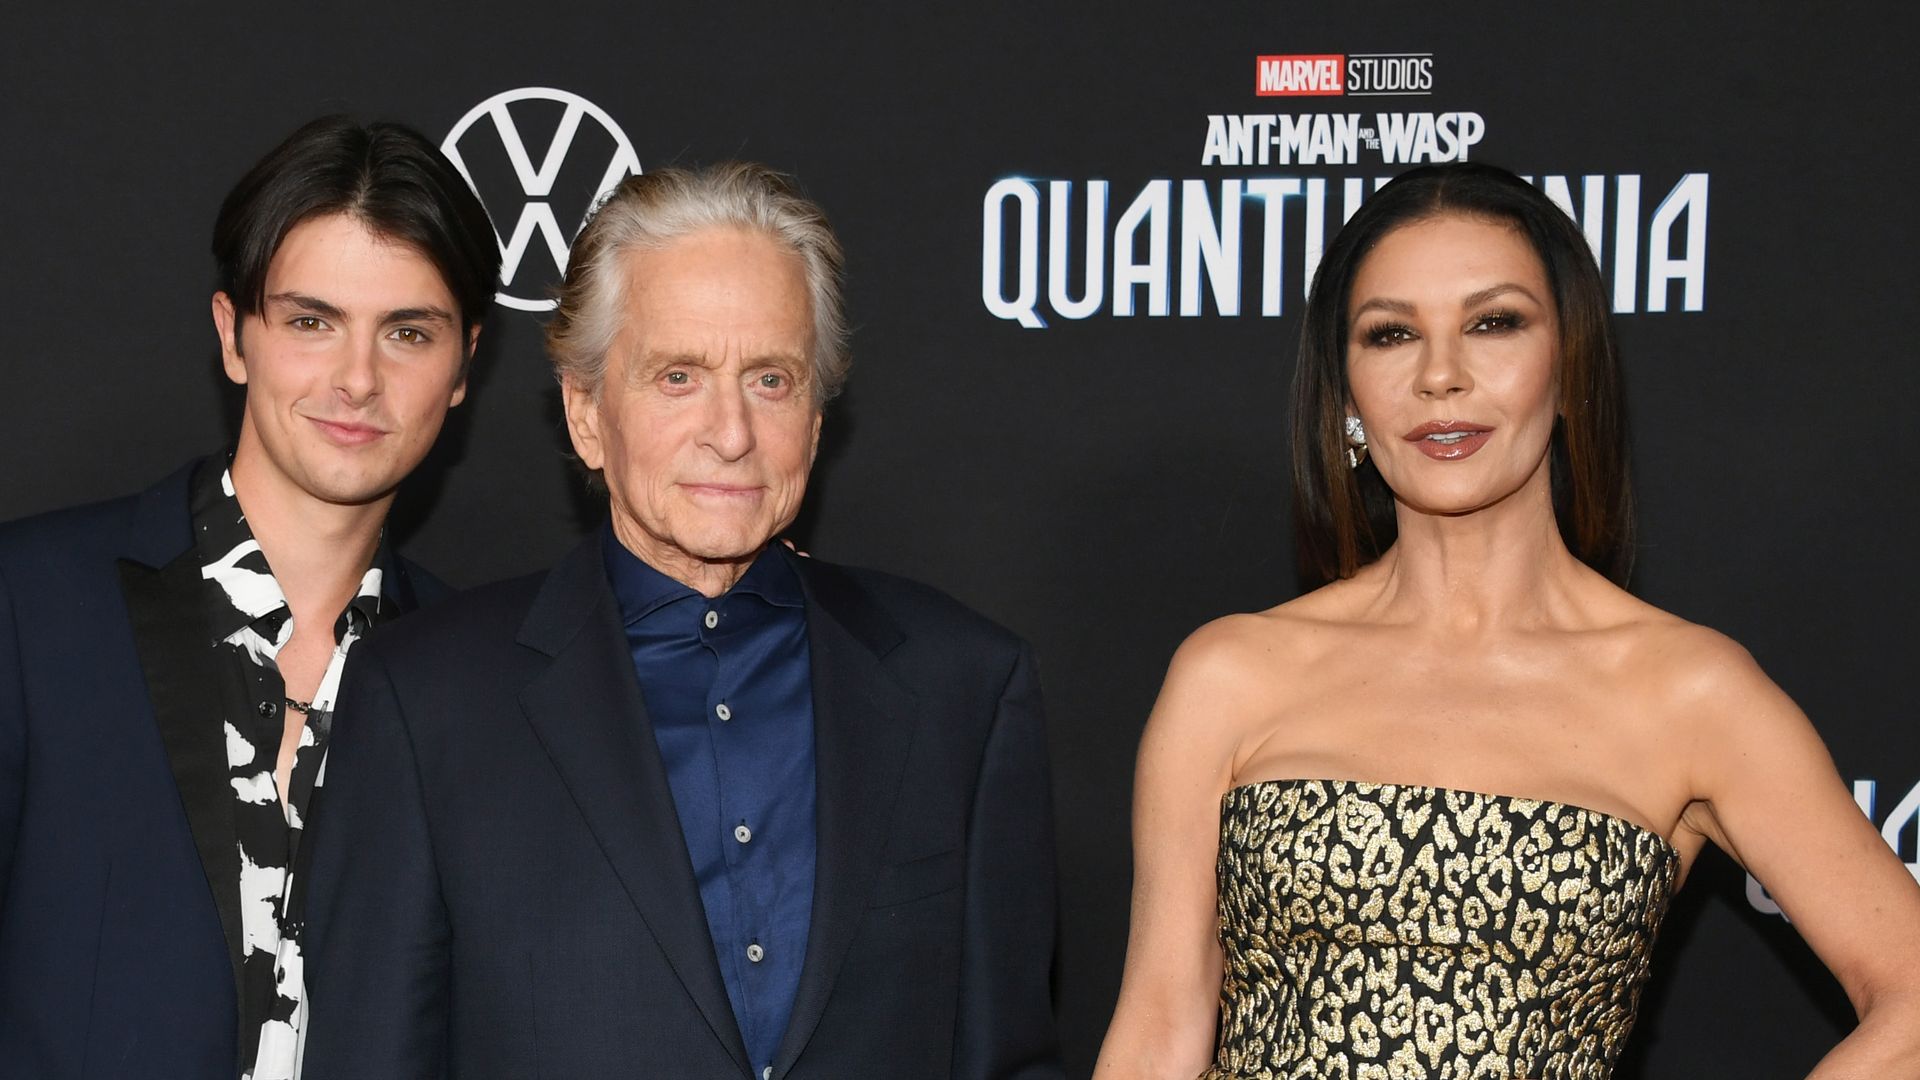 Catherine Zeta Jones and Michael Douglas' son Dylan, 23, shares intimate new video as he follows in parents footsteps in acting